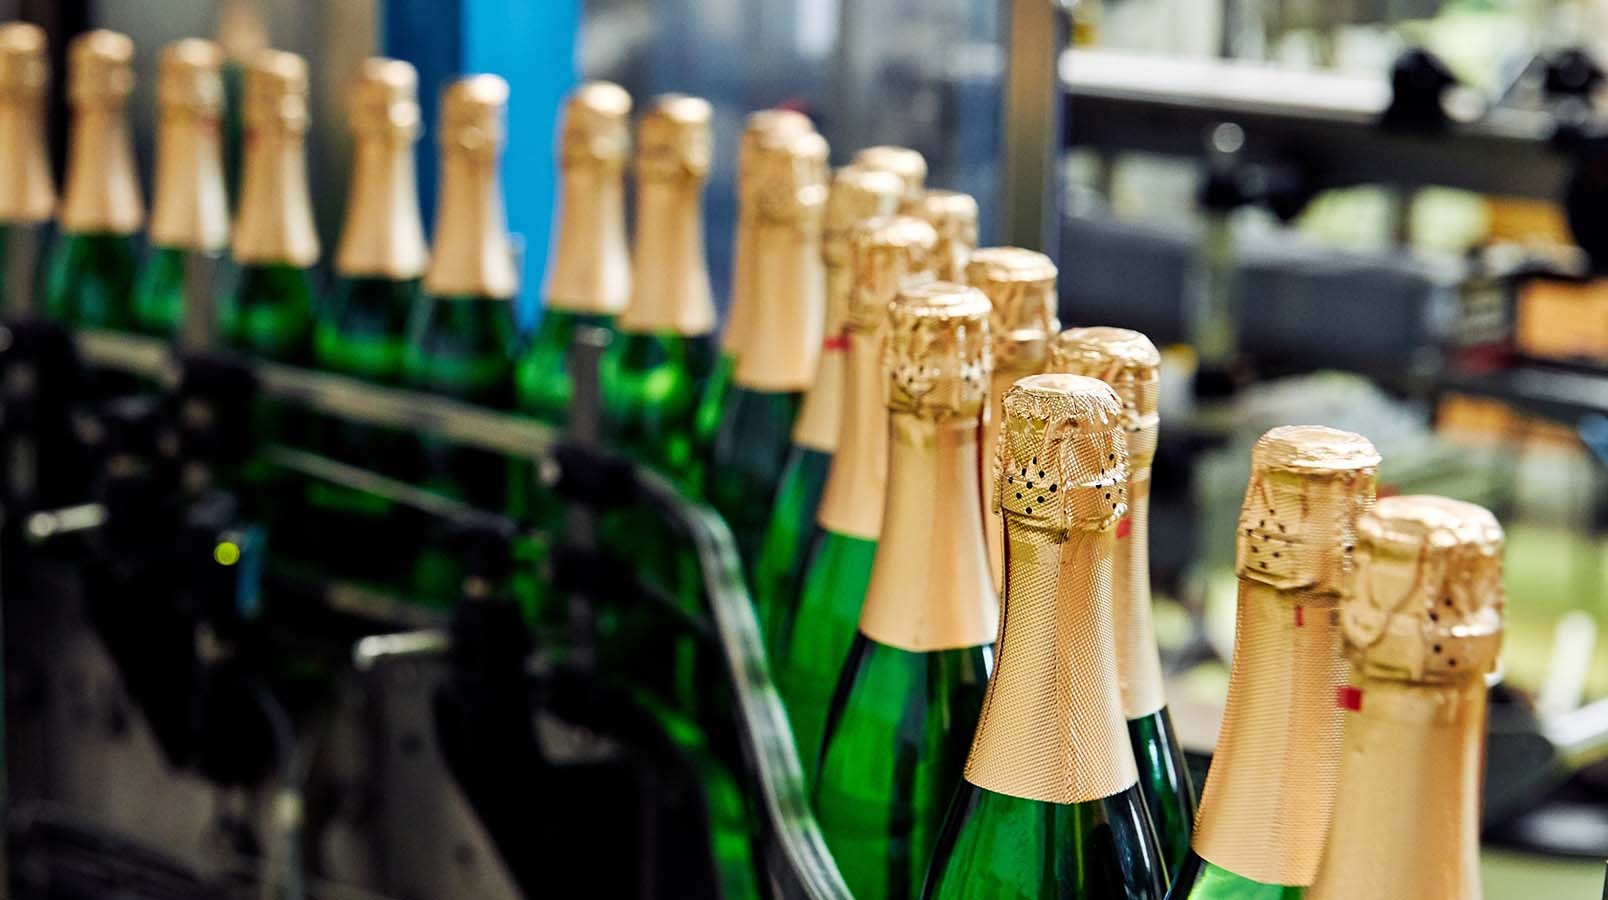 19 Best Champagne Brands For All Your Celebrations (2023)